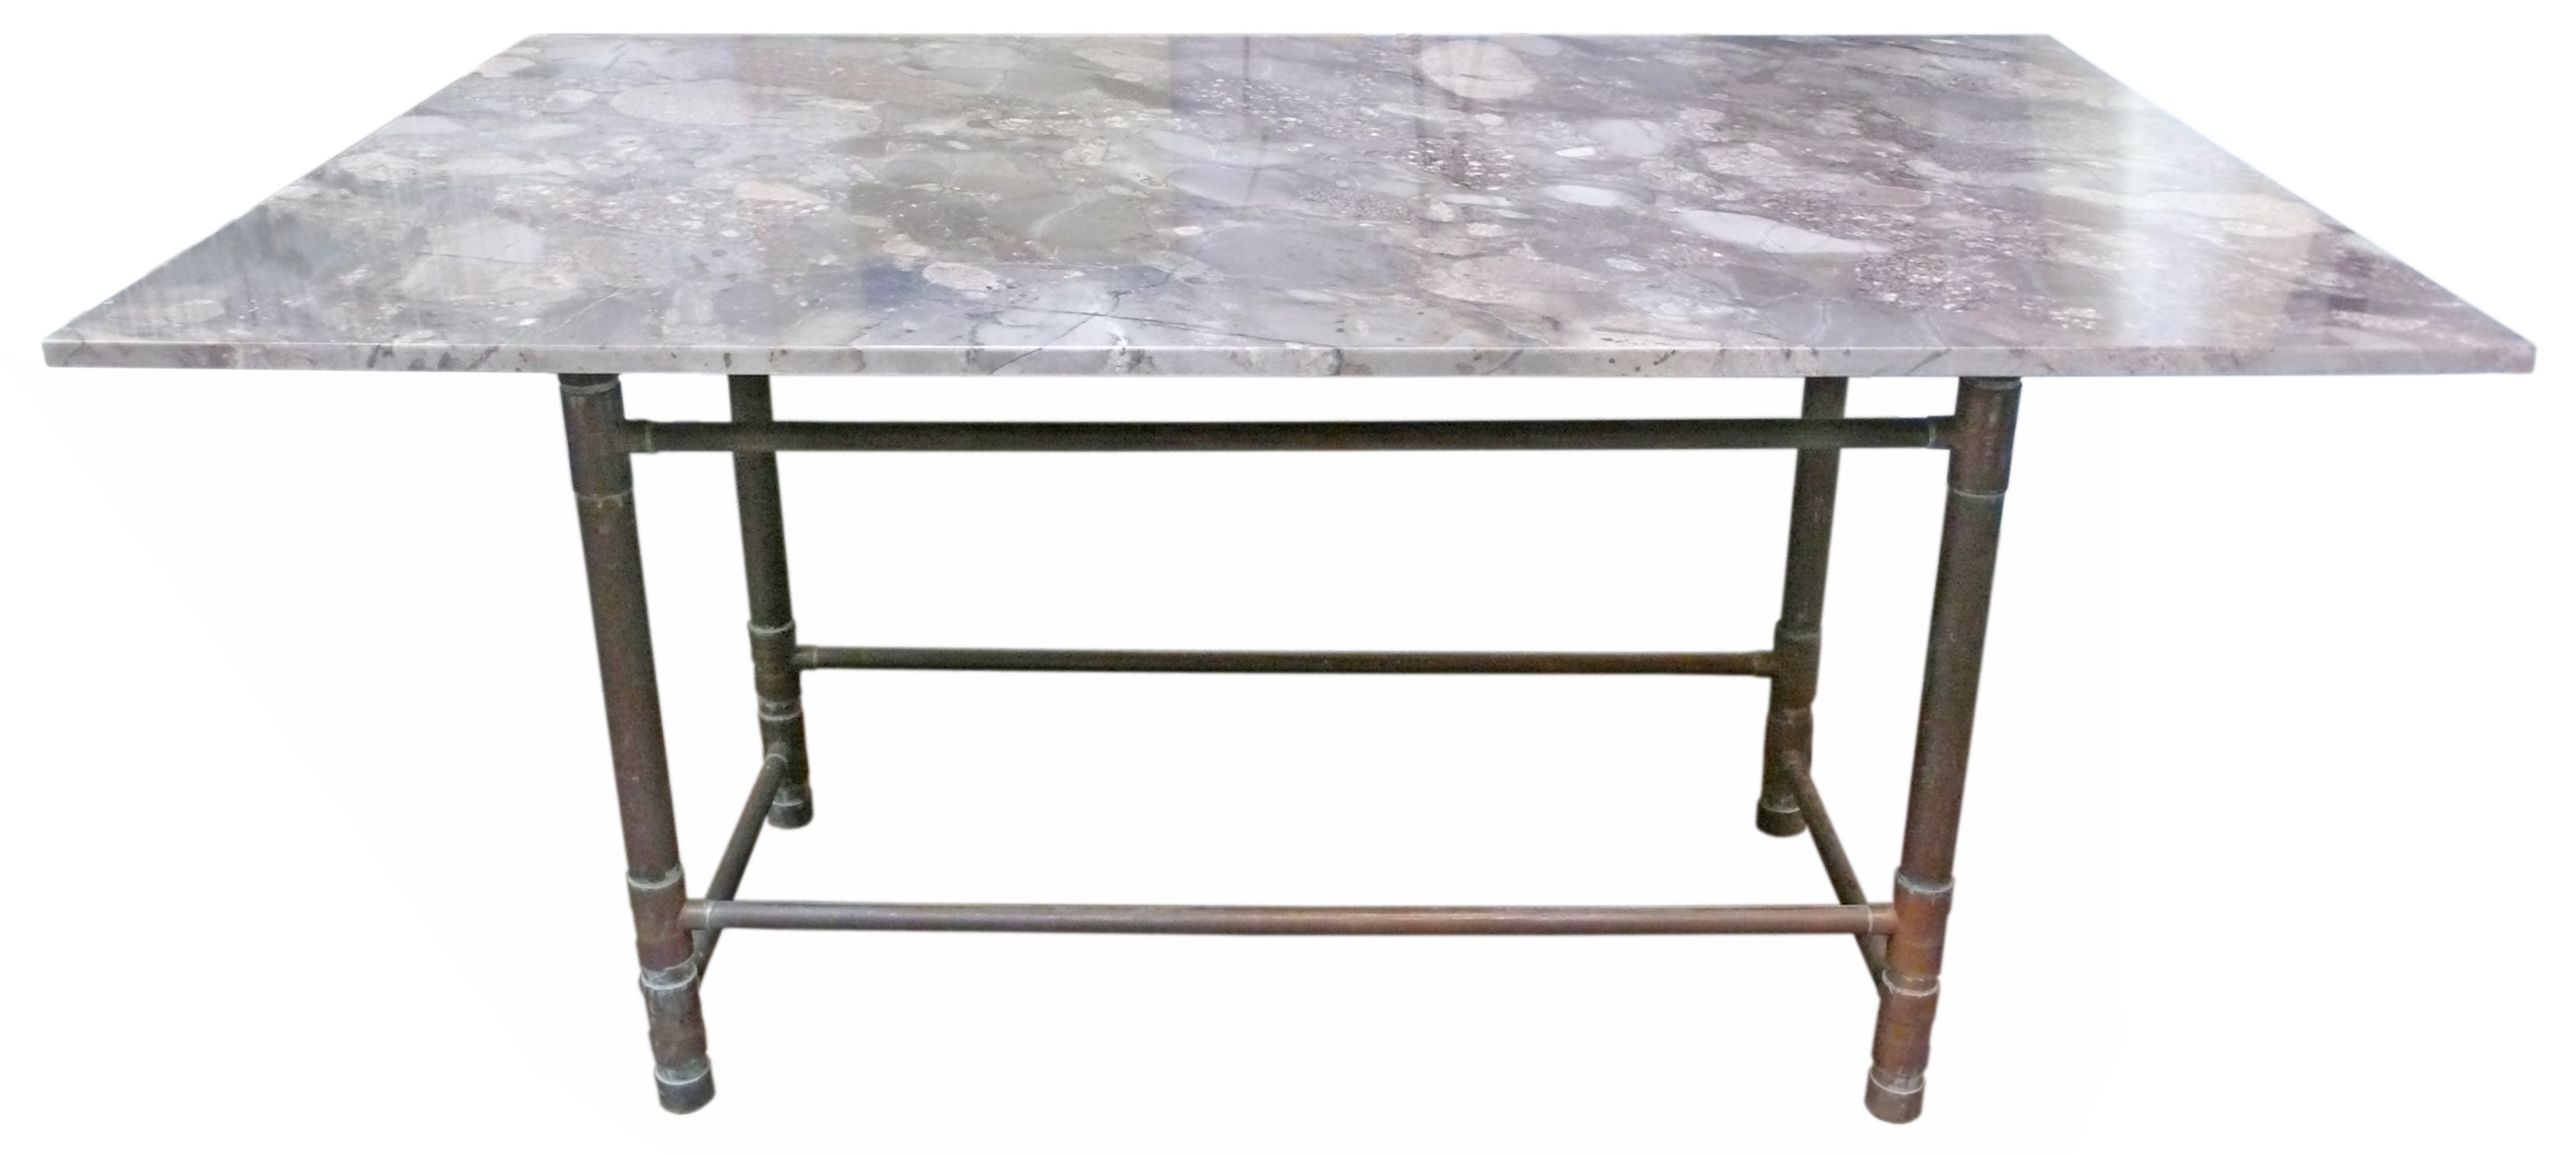 Unusual Copper and Exotic Granite Dining Table